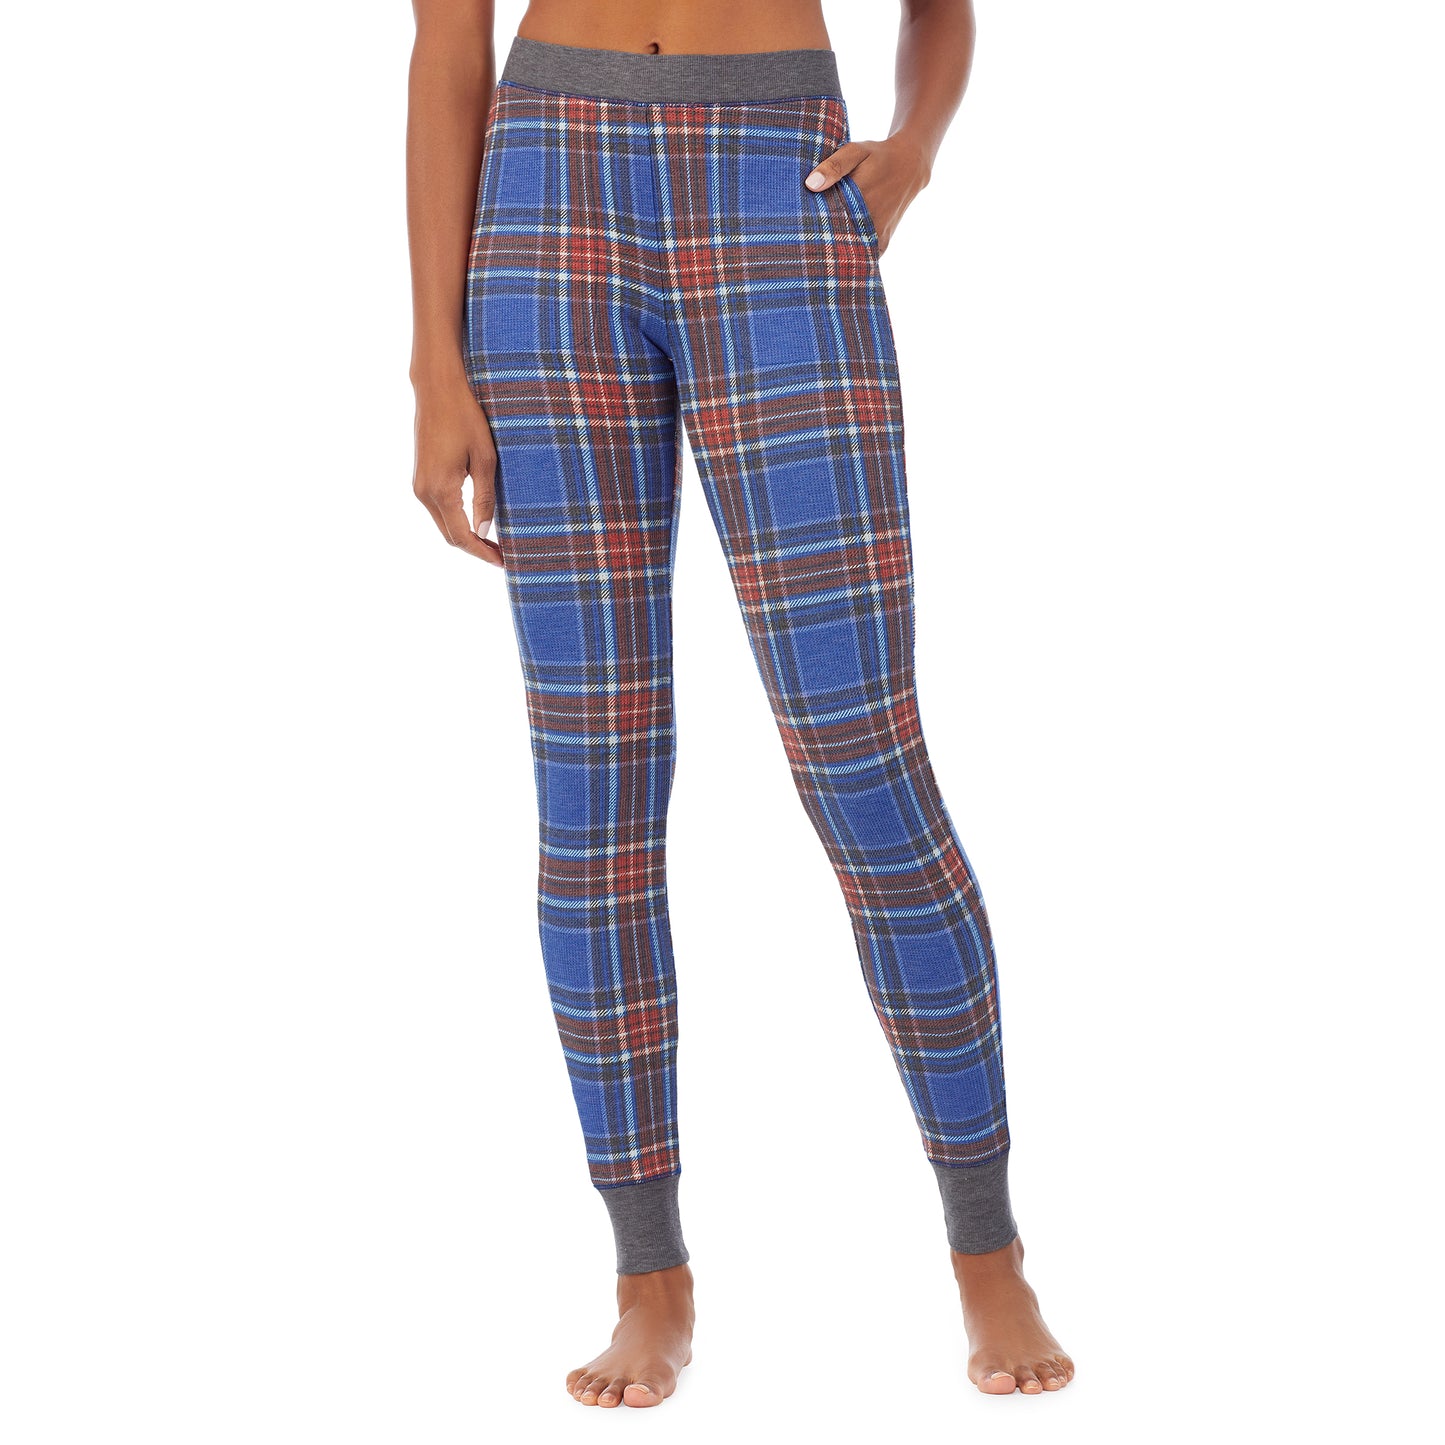 Red Blue Plaid; Model is wearing size S. She is 5’9”, Bust 32”, Waist 25.5”, Hips 36”. @A lady wearing a red blue plaid legging.